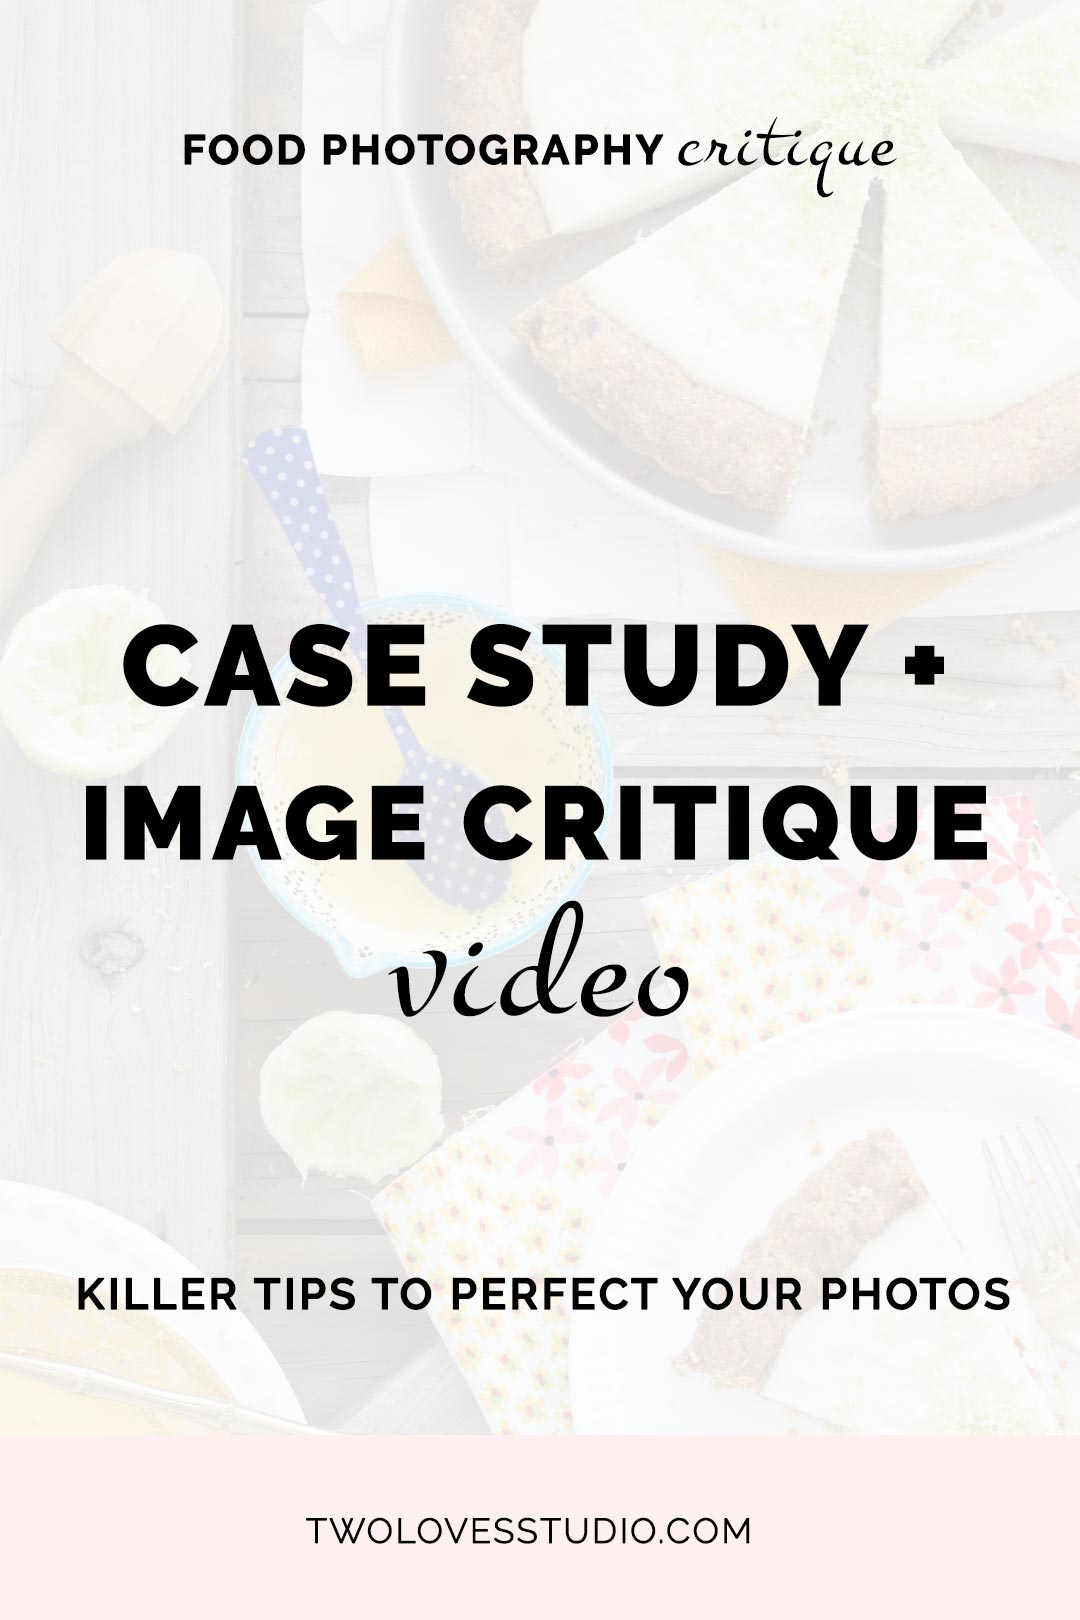 Food Photography Image Critiques. Watch this critique video for Killer Tips To Improve Your Food Photography. Click to watch.